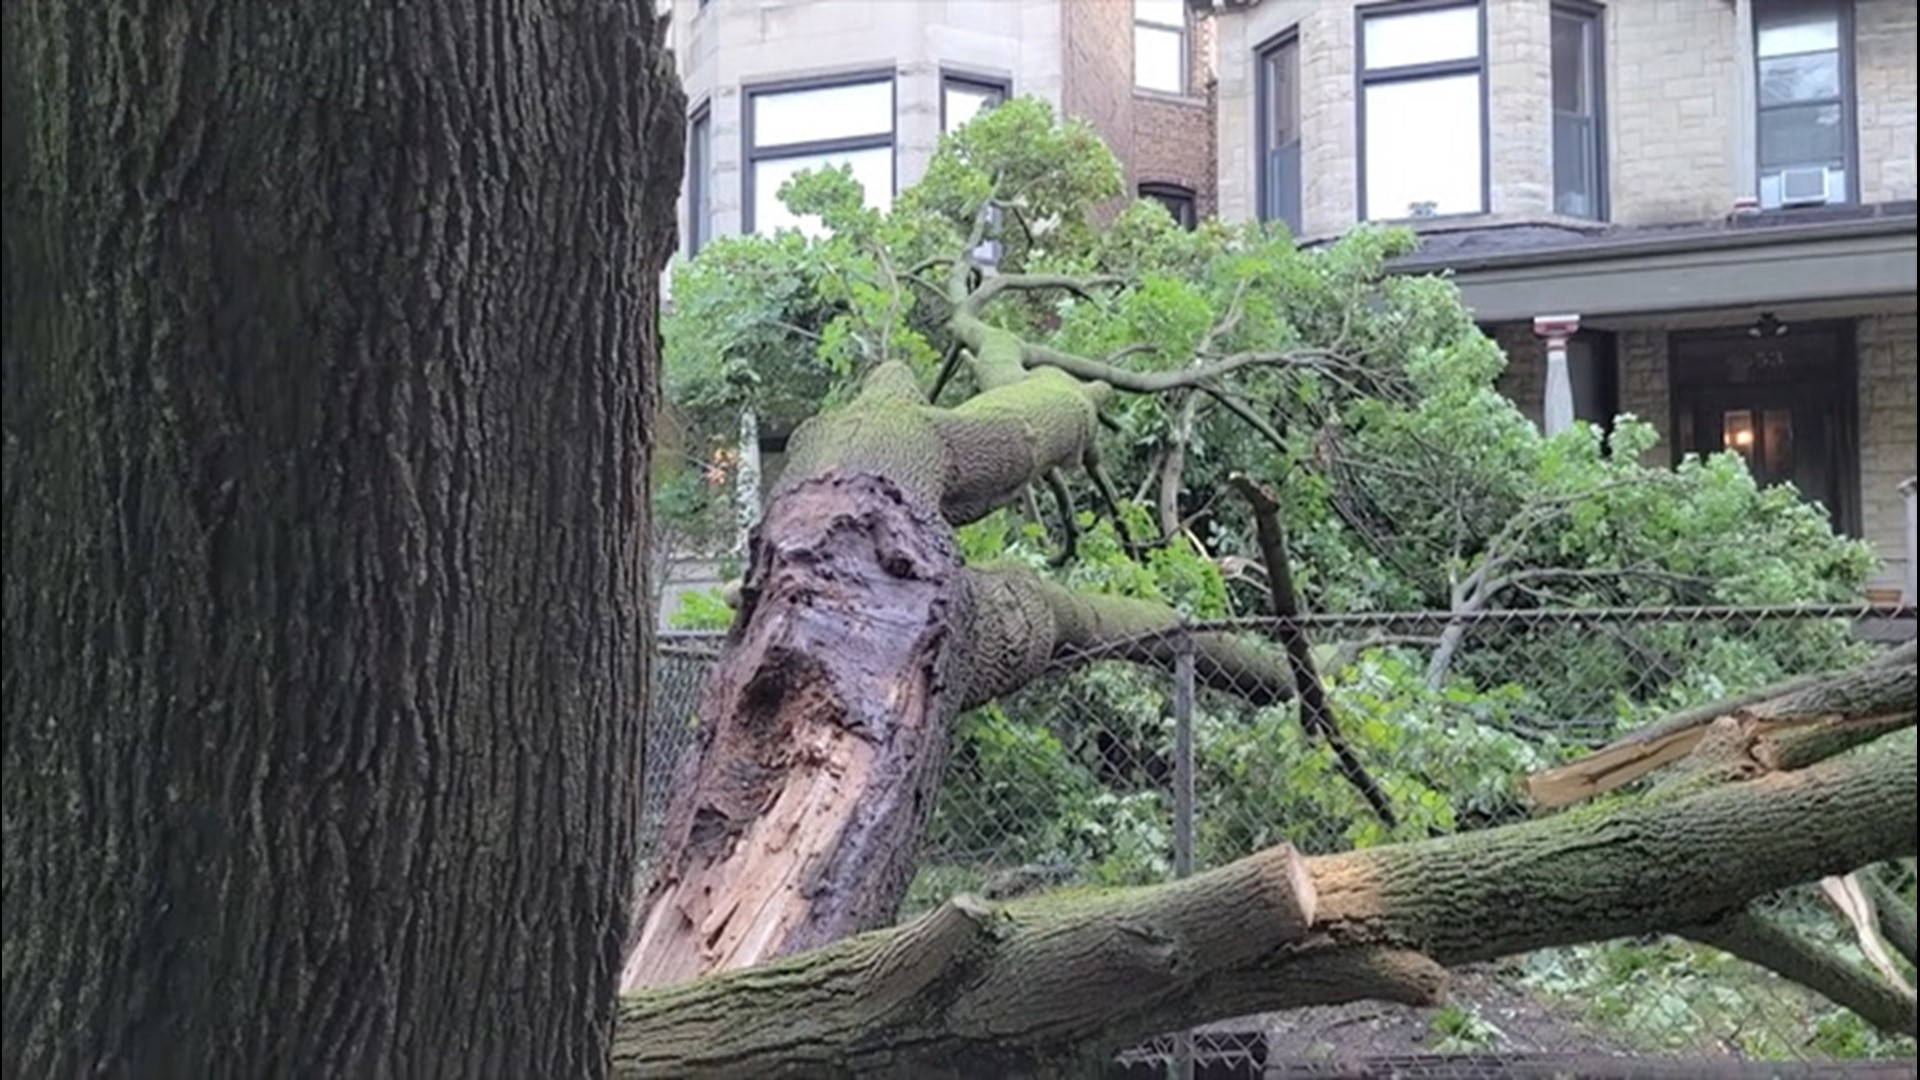 Residents in Chicago, Illinois, were cleaning up debris on Aug. 11, after storms swept through the area on the 10th.